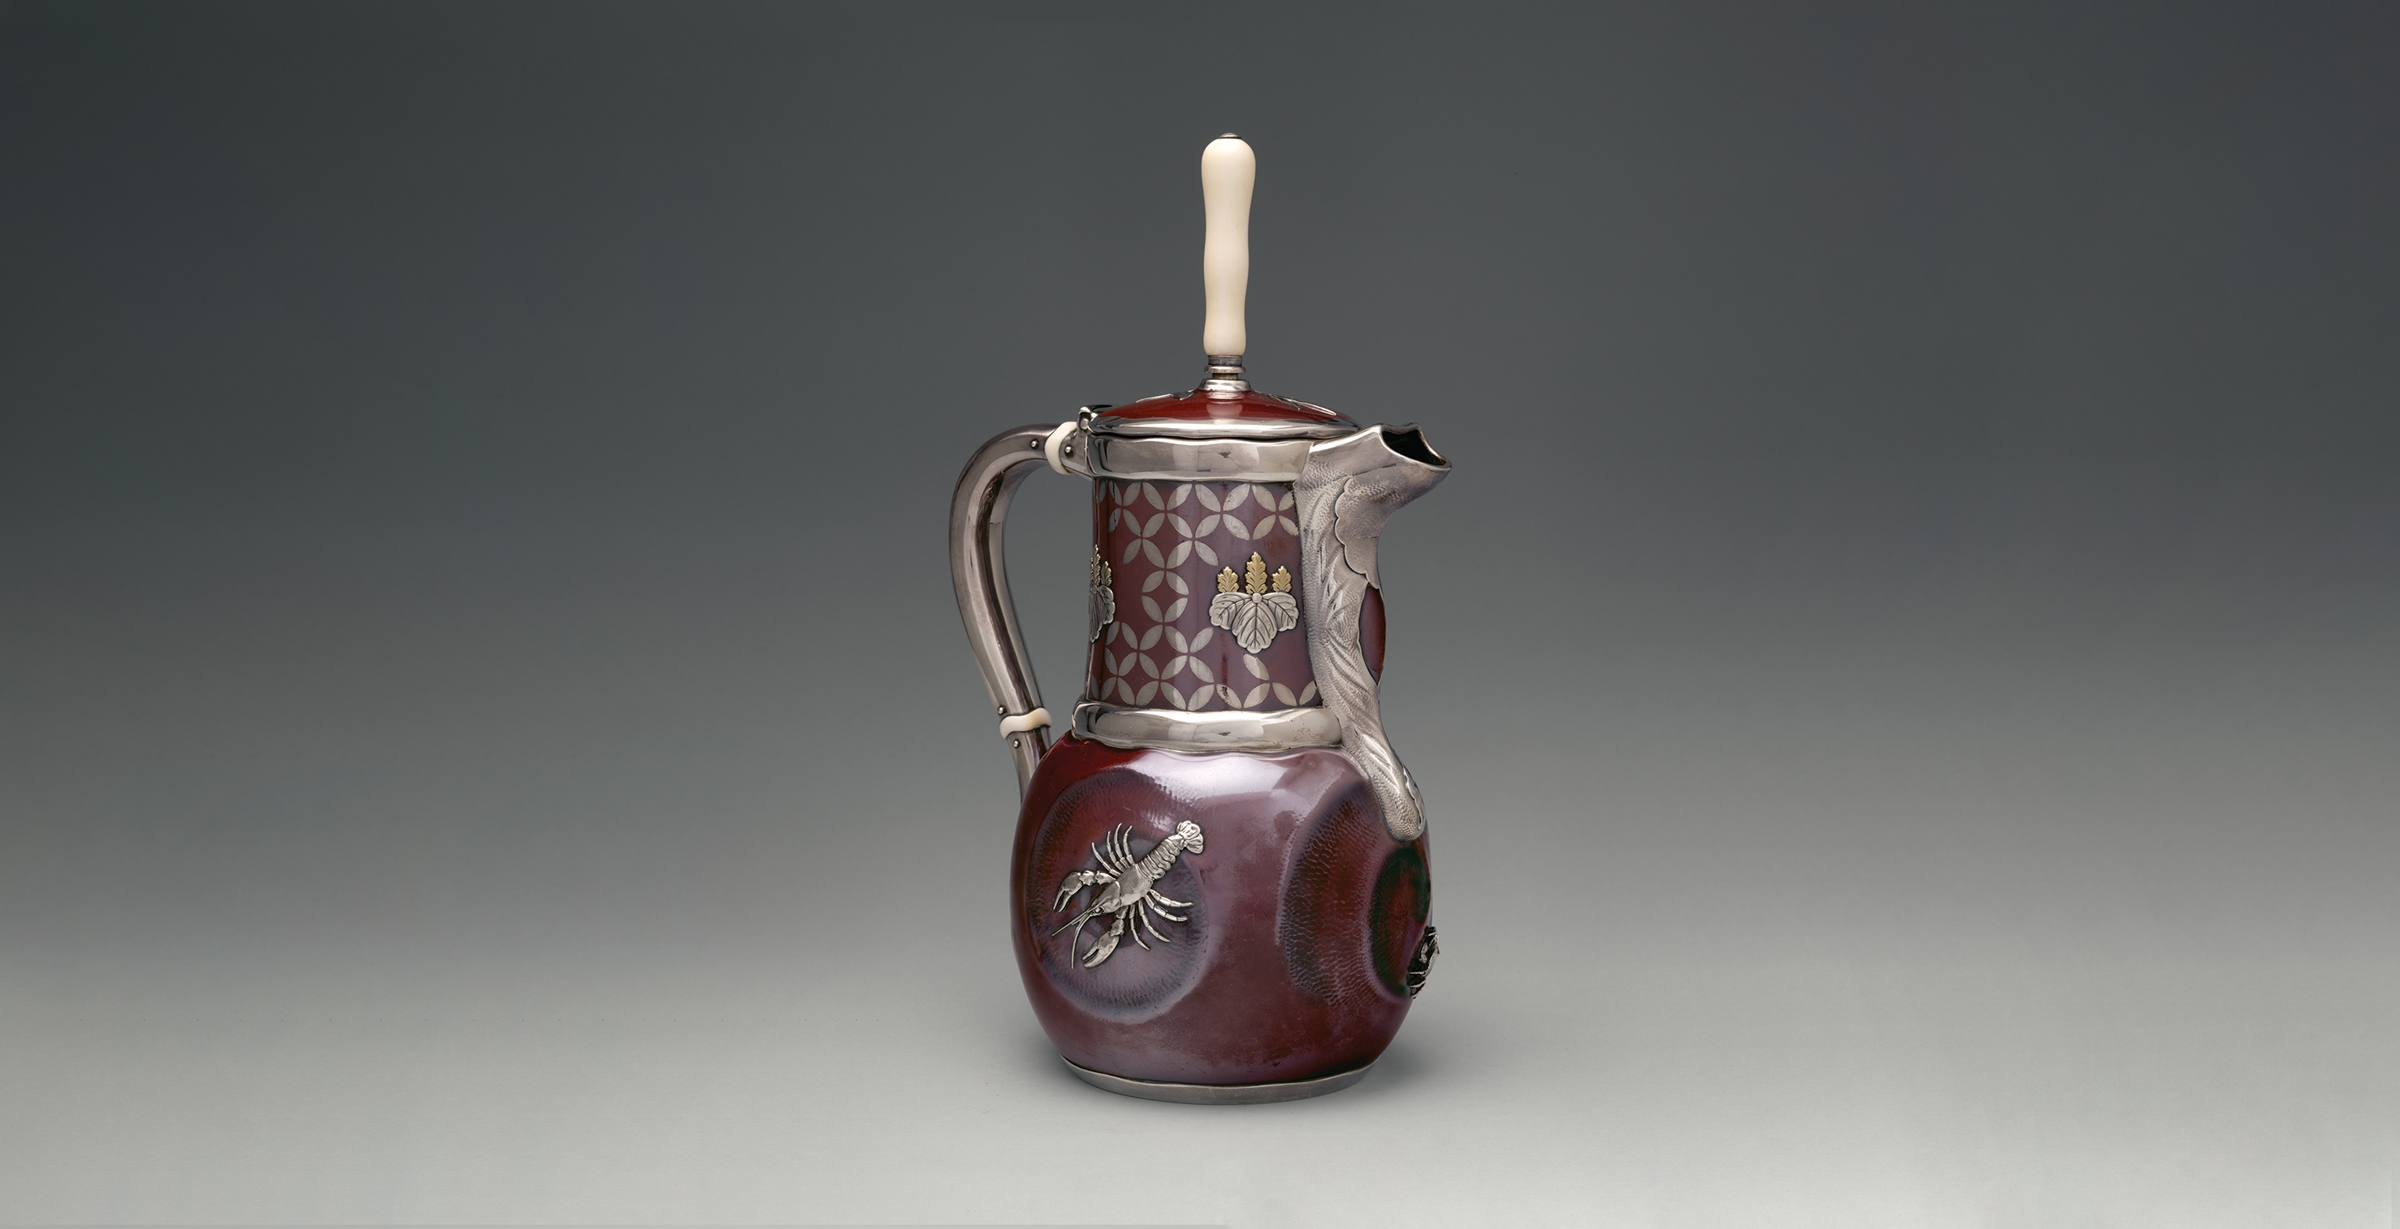 A three-quarter view of a patinated copper and silver chocolate pot in the shape of a pitcher with a handle, spot, and ivory handle. Silver banding emphasizes the handle, spout, and rim of the lid and neck. A lobster rendered in high-relief silver adorns the body of the pot.